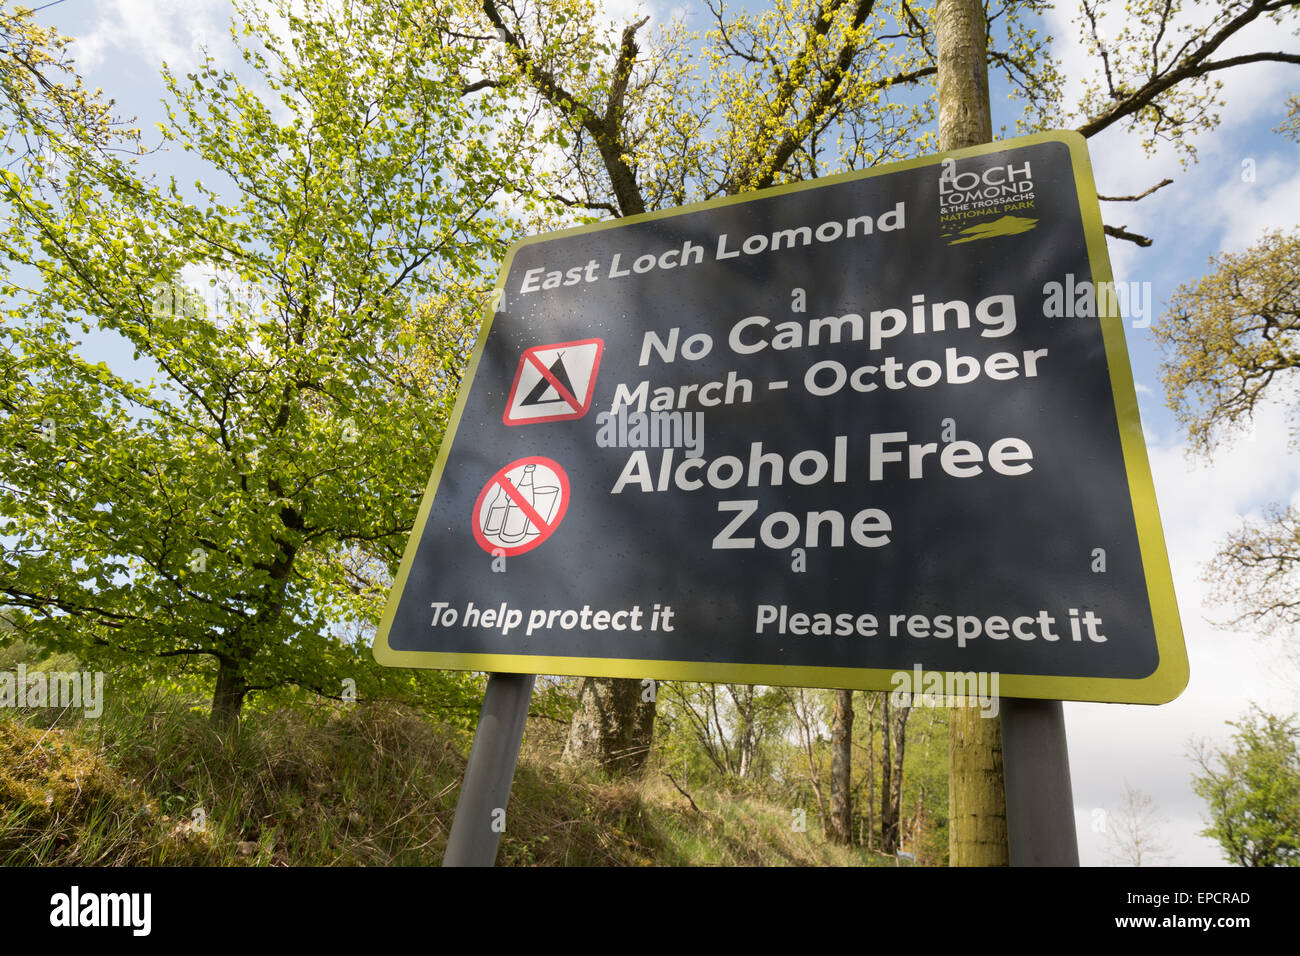 sign-in-loch-lomond-the-trossachs-national-park-showing-no-camping-EPCRAD.jpg